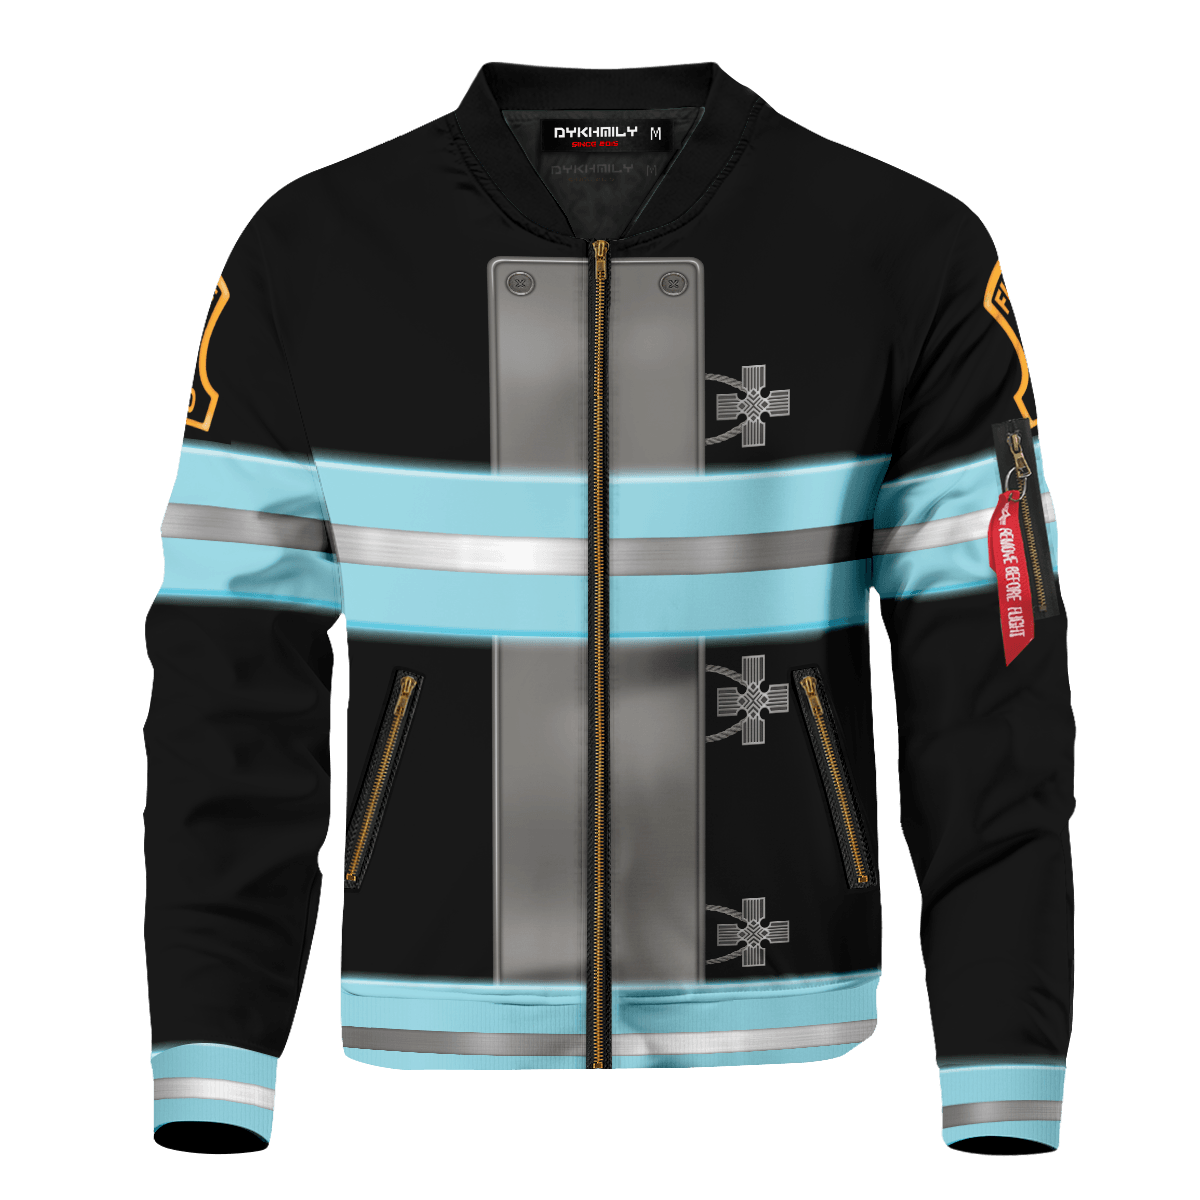 Anime Fire Force Bomber Jacket